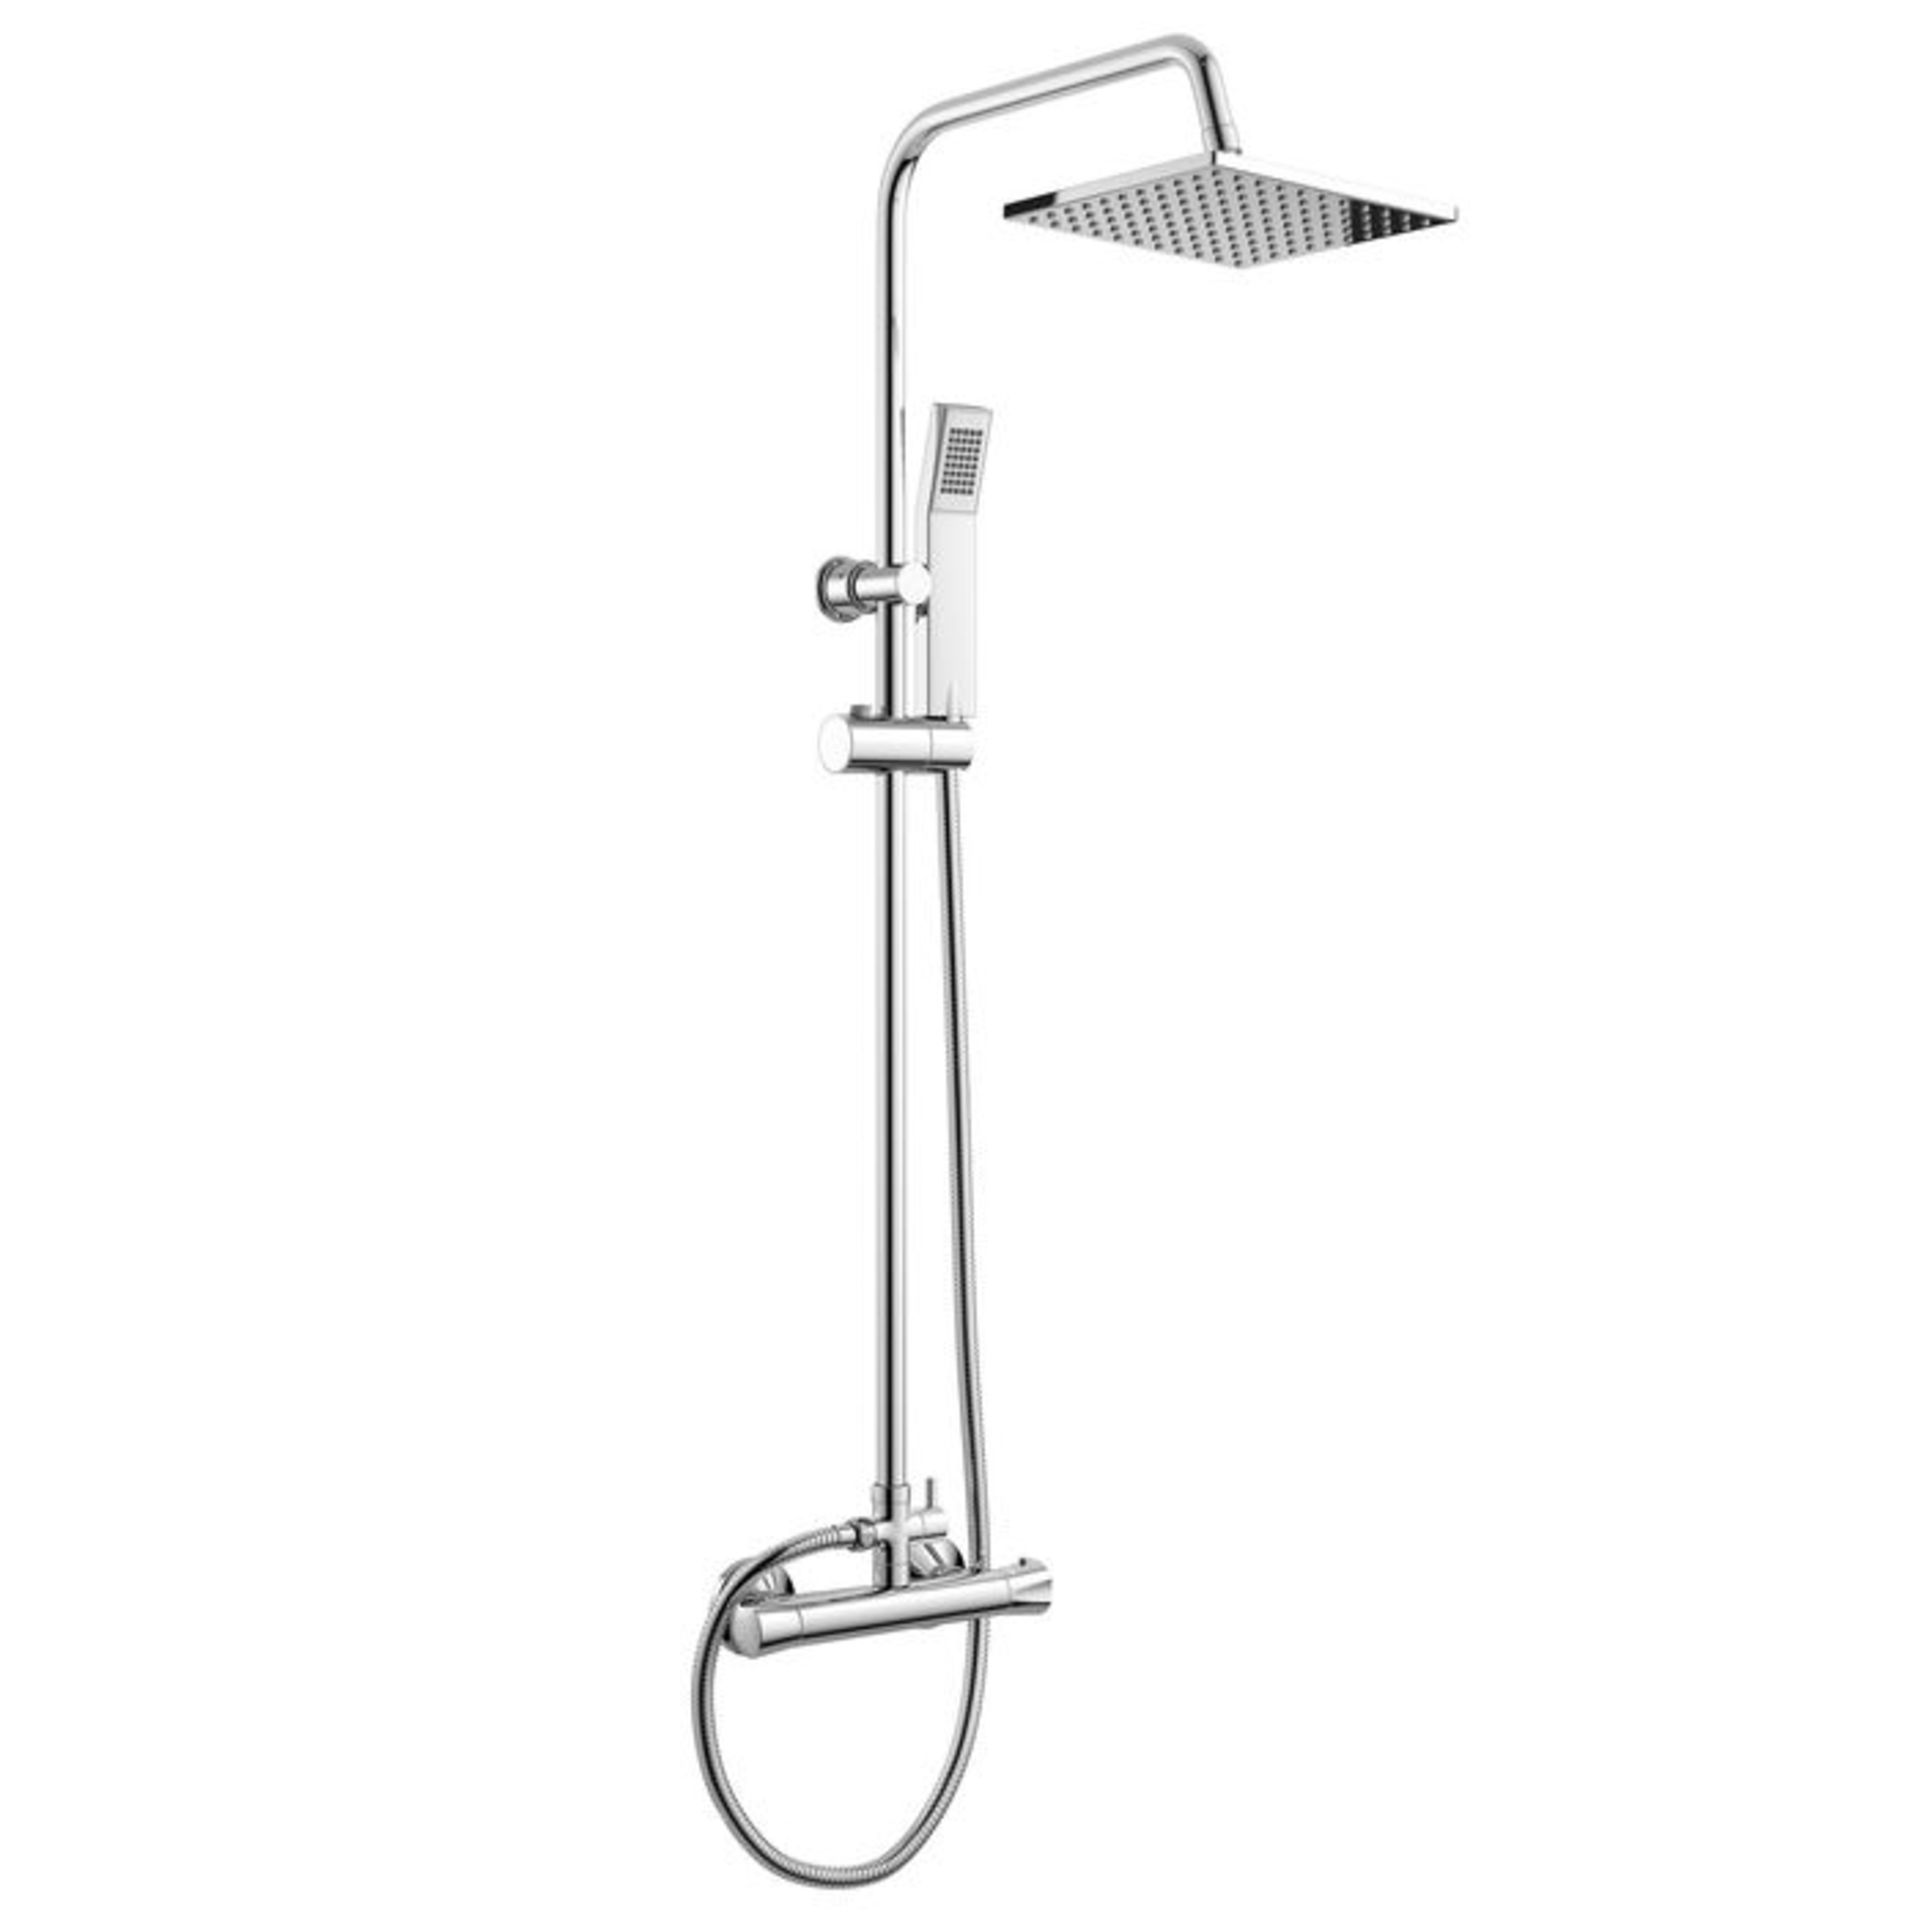 (NY97) Square Exposed Thermostatic Shower Kit & Medium Head. Curved features and contemporary - Image 2 of 3